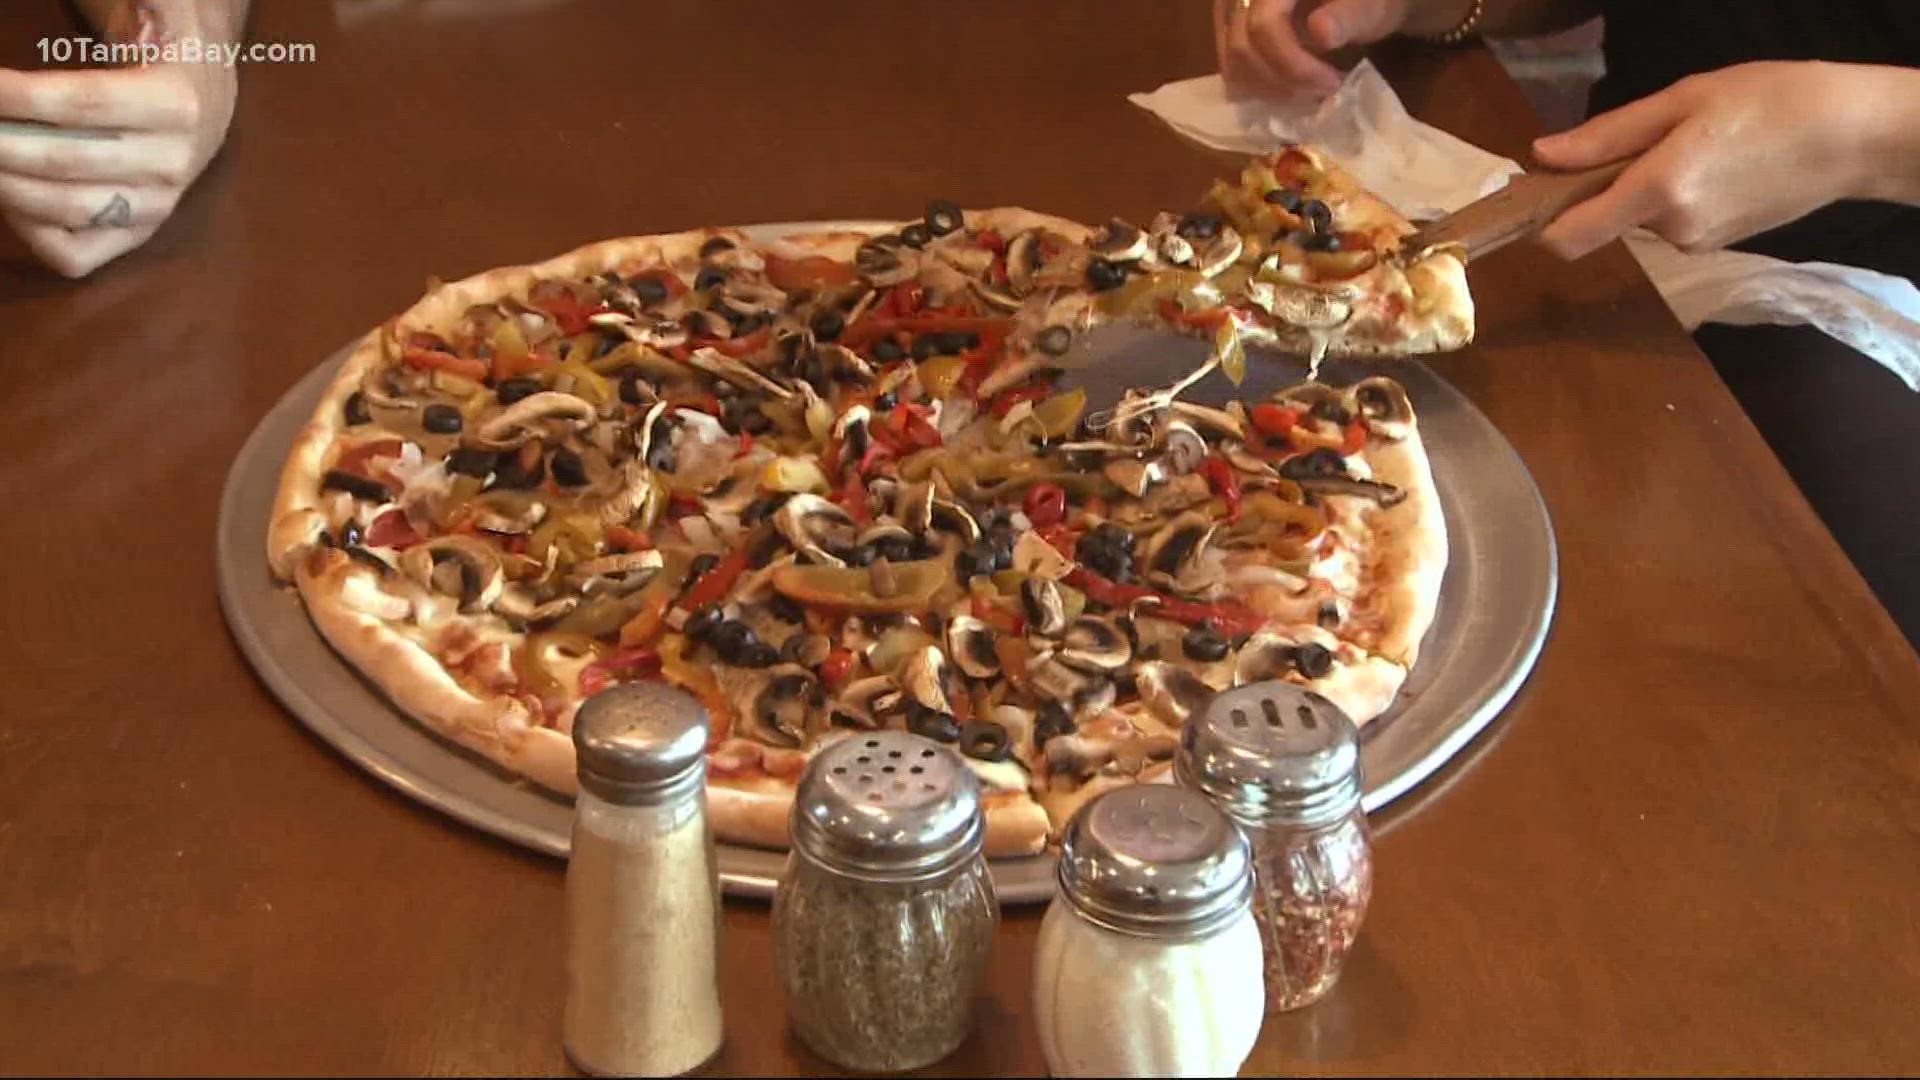 Feb. 9 is National Pizza Day and we've got the deals you should know about.